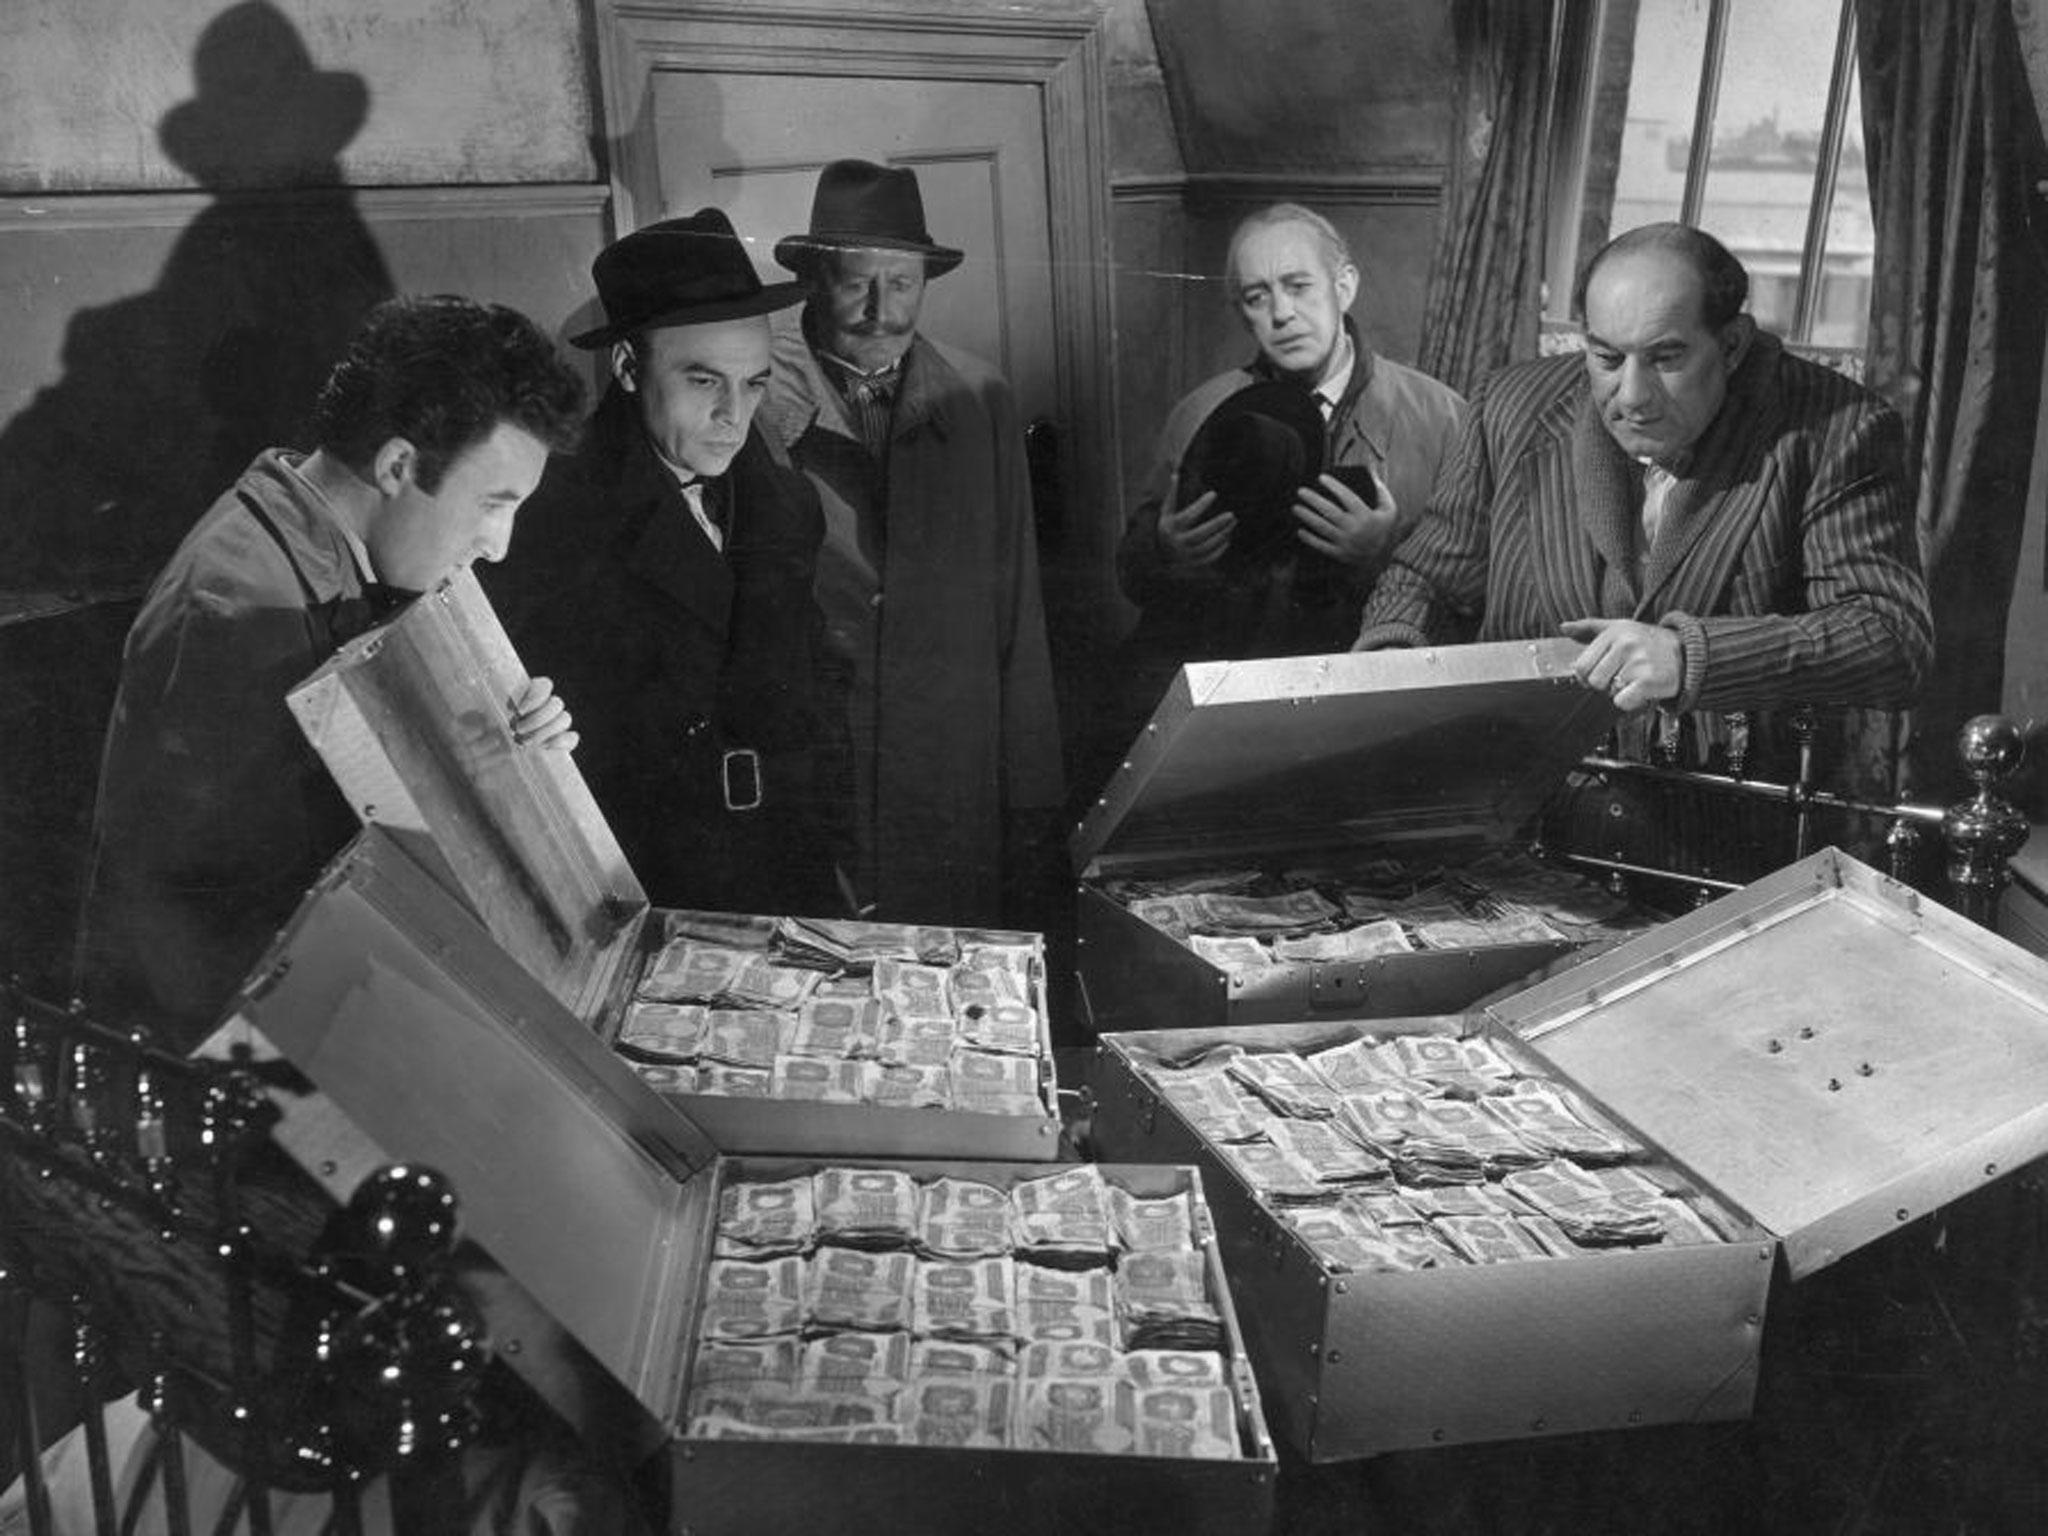 The crooks, like these in the 1955 film The Ladykillers, are waiting in the shadows as people cash in their savings